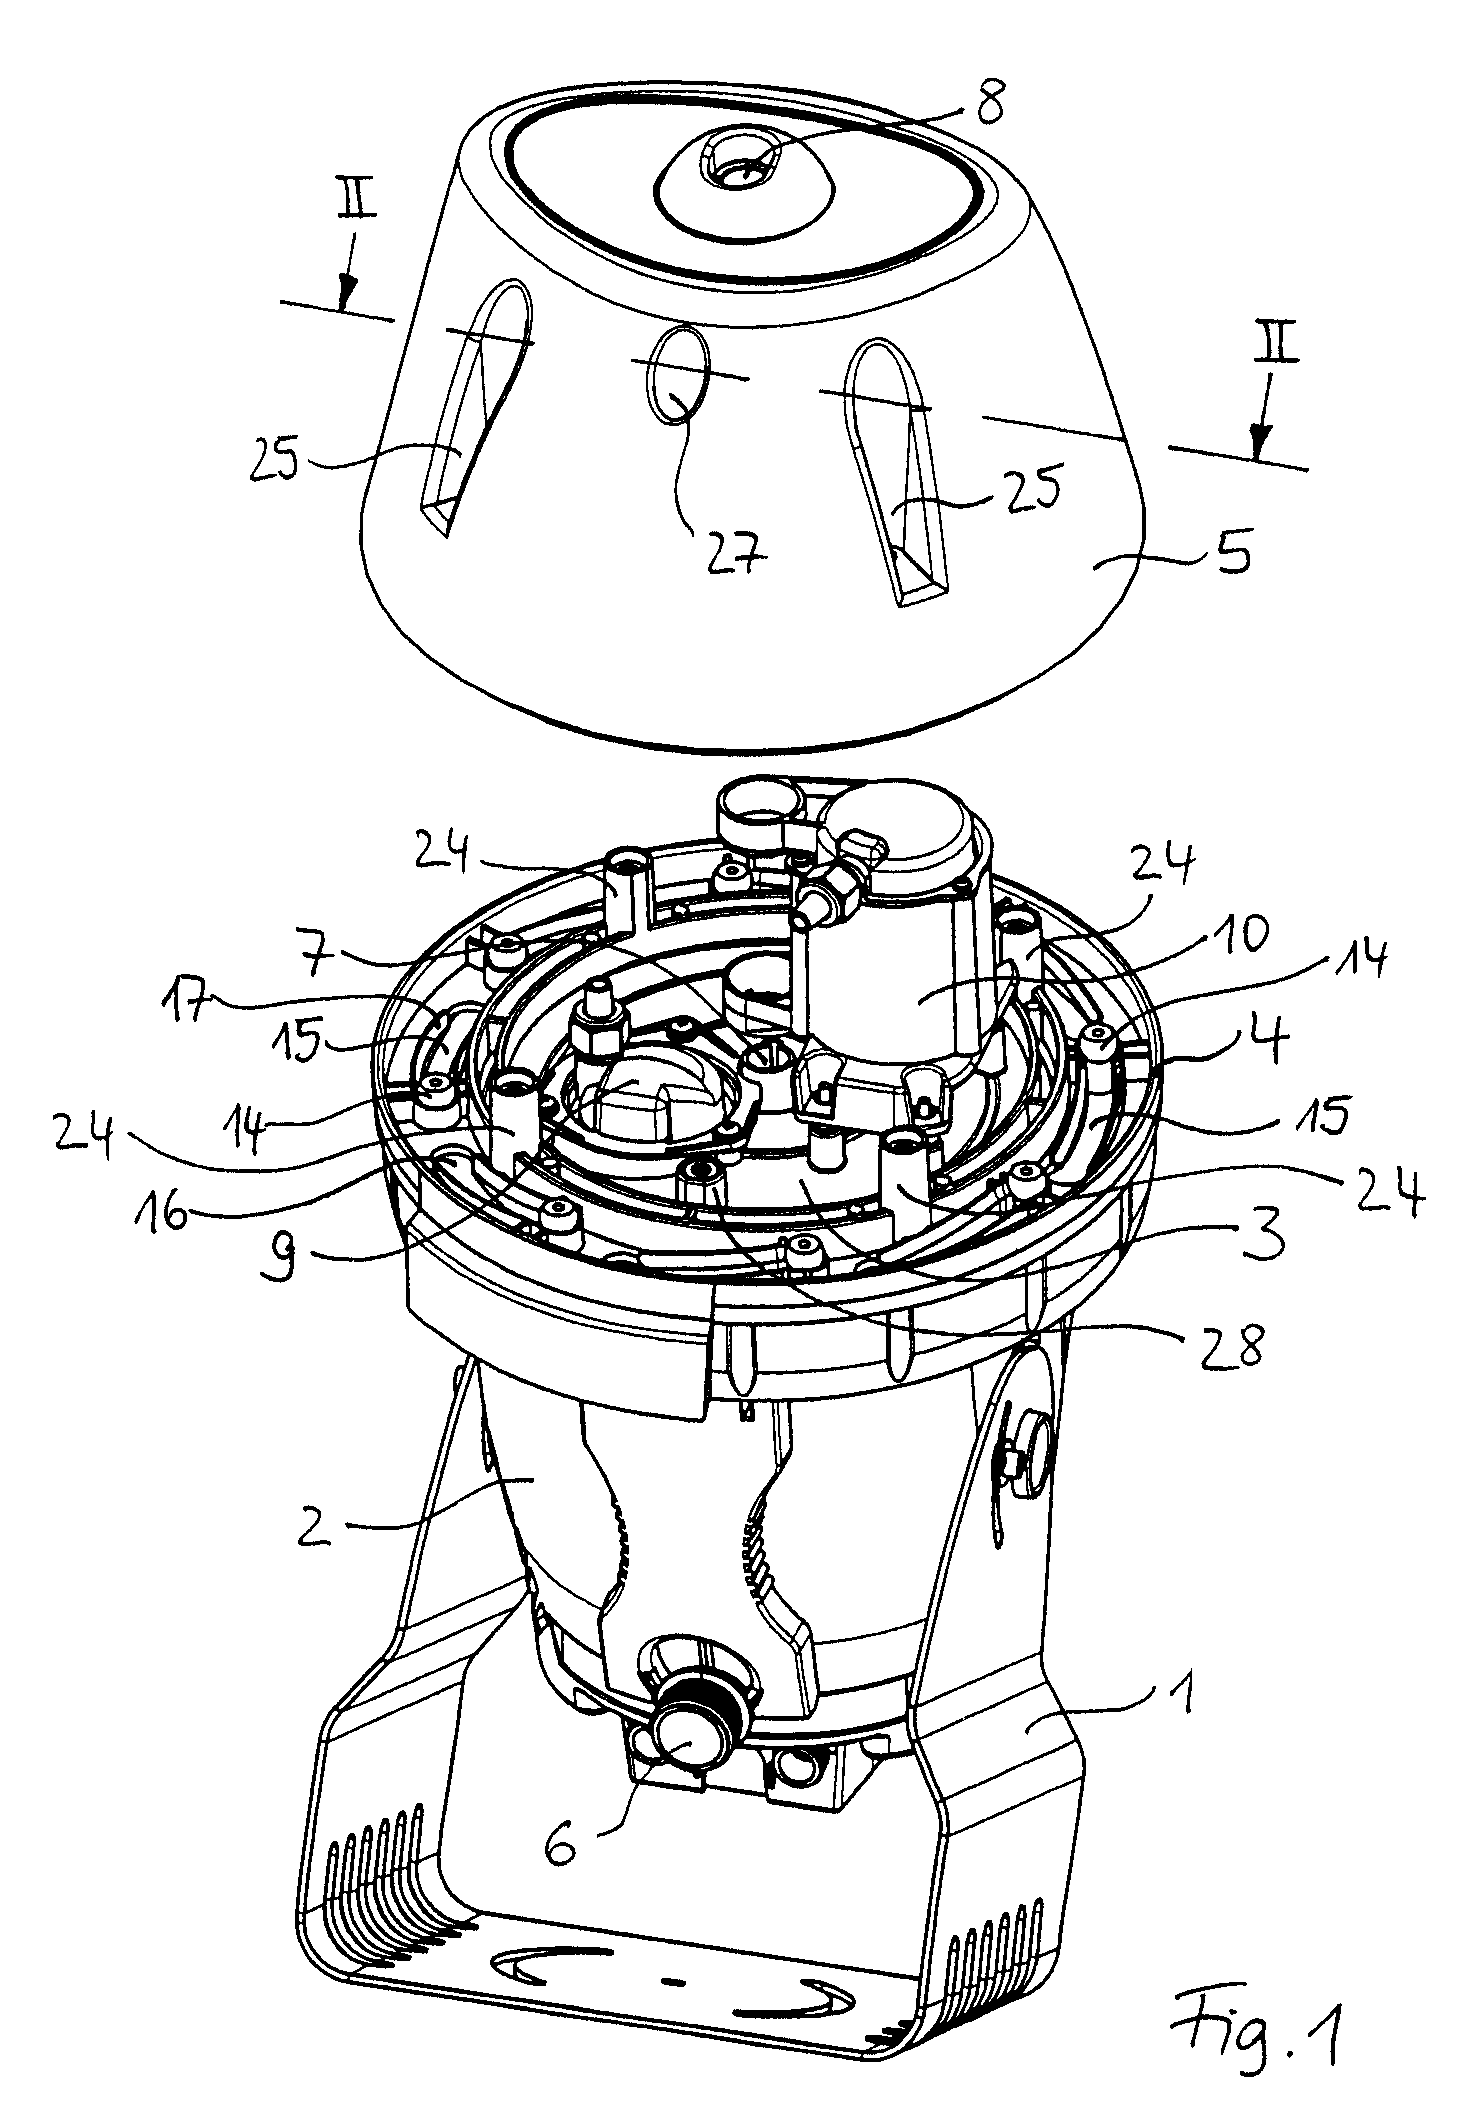 Pressurized water container